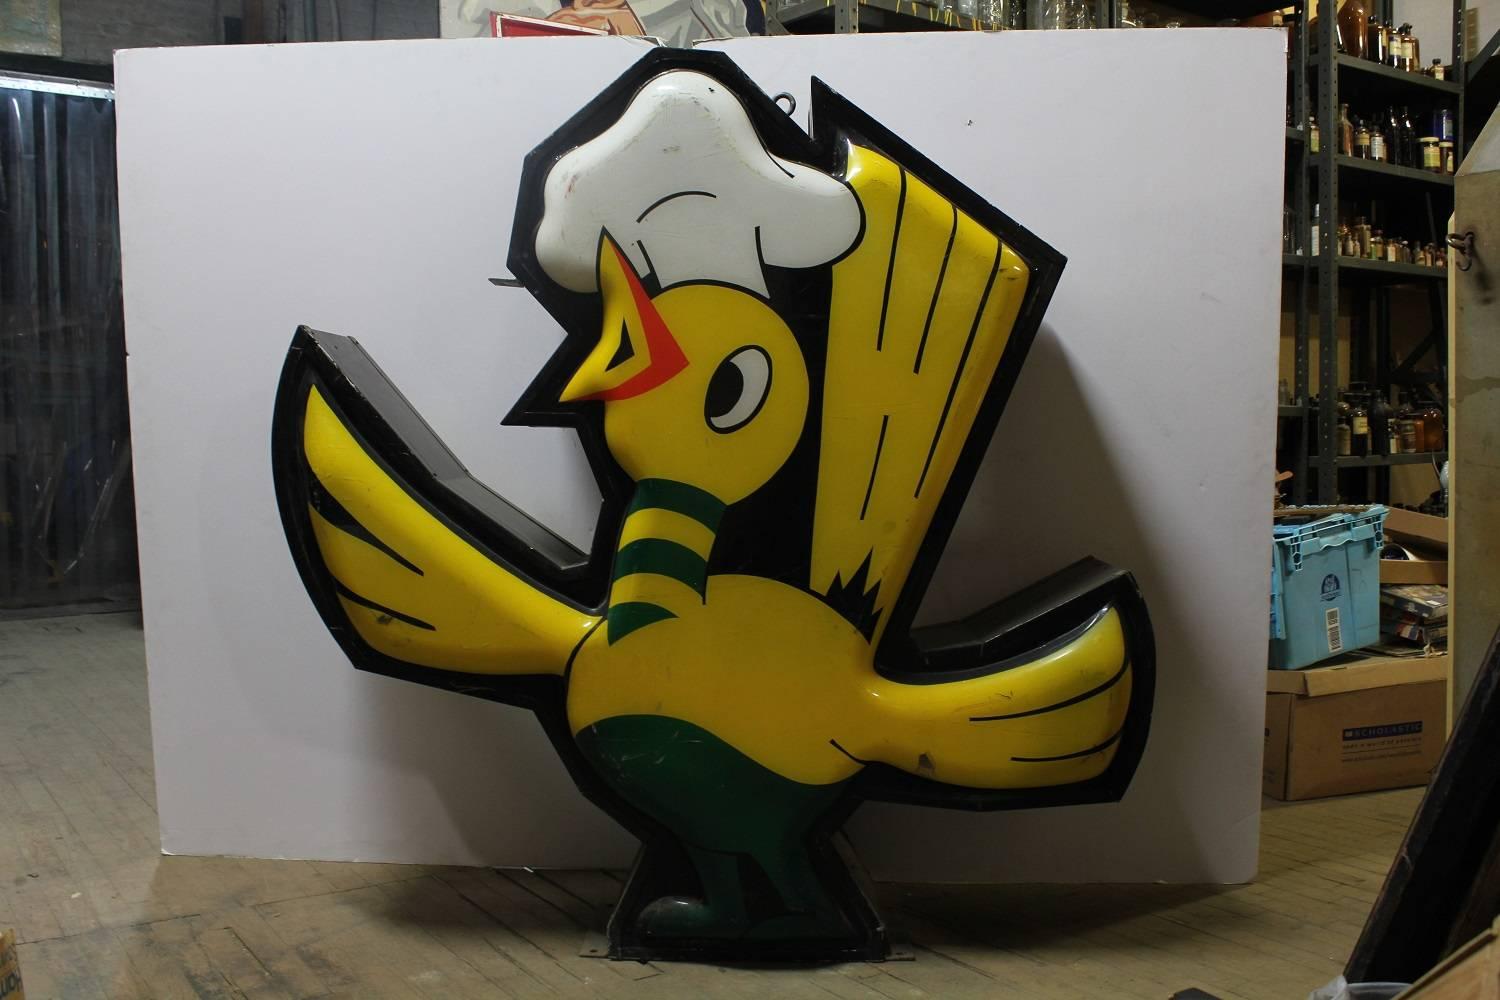 Large 1960s double sided light up chicken sign.